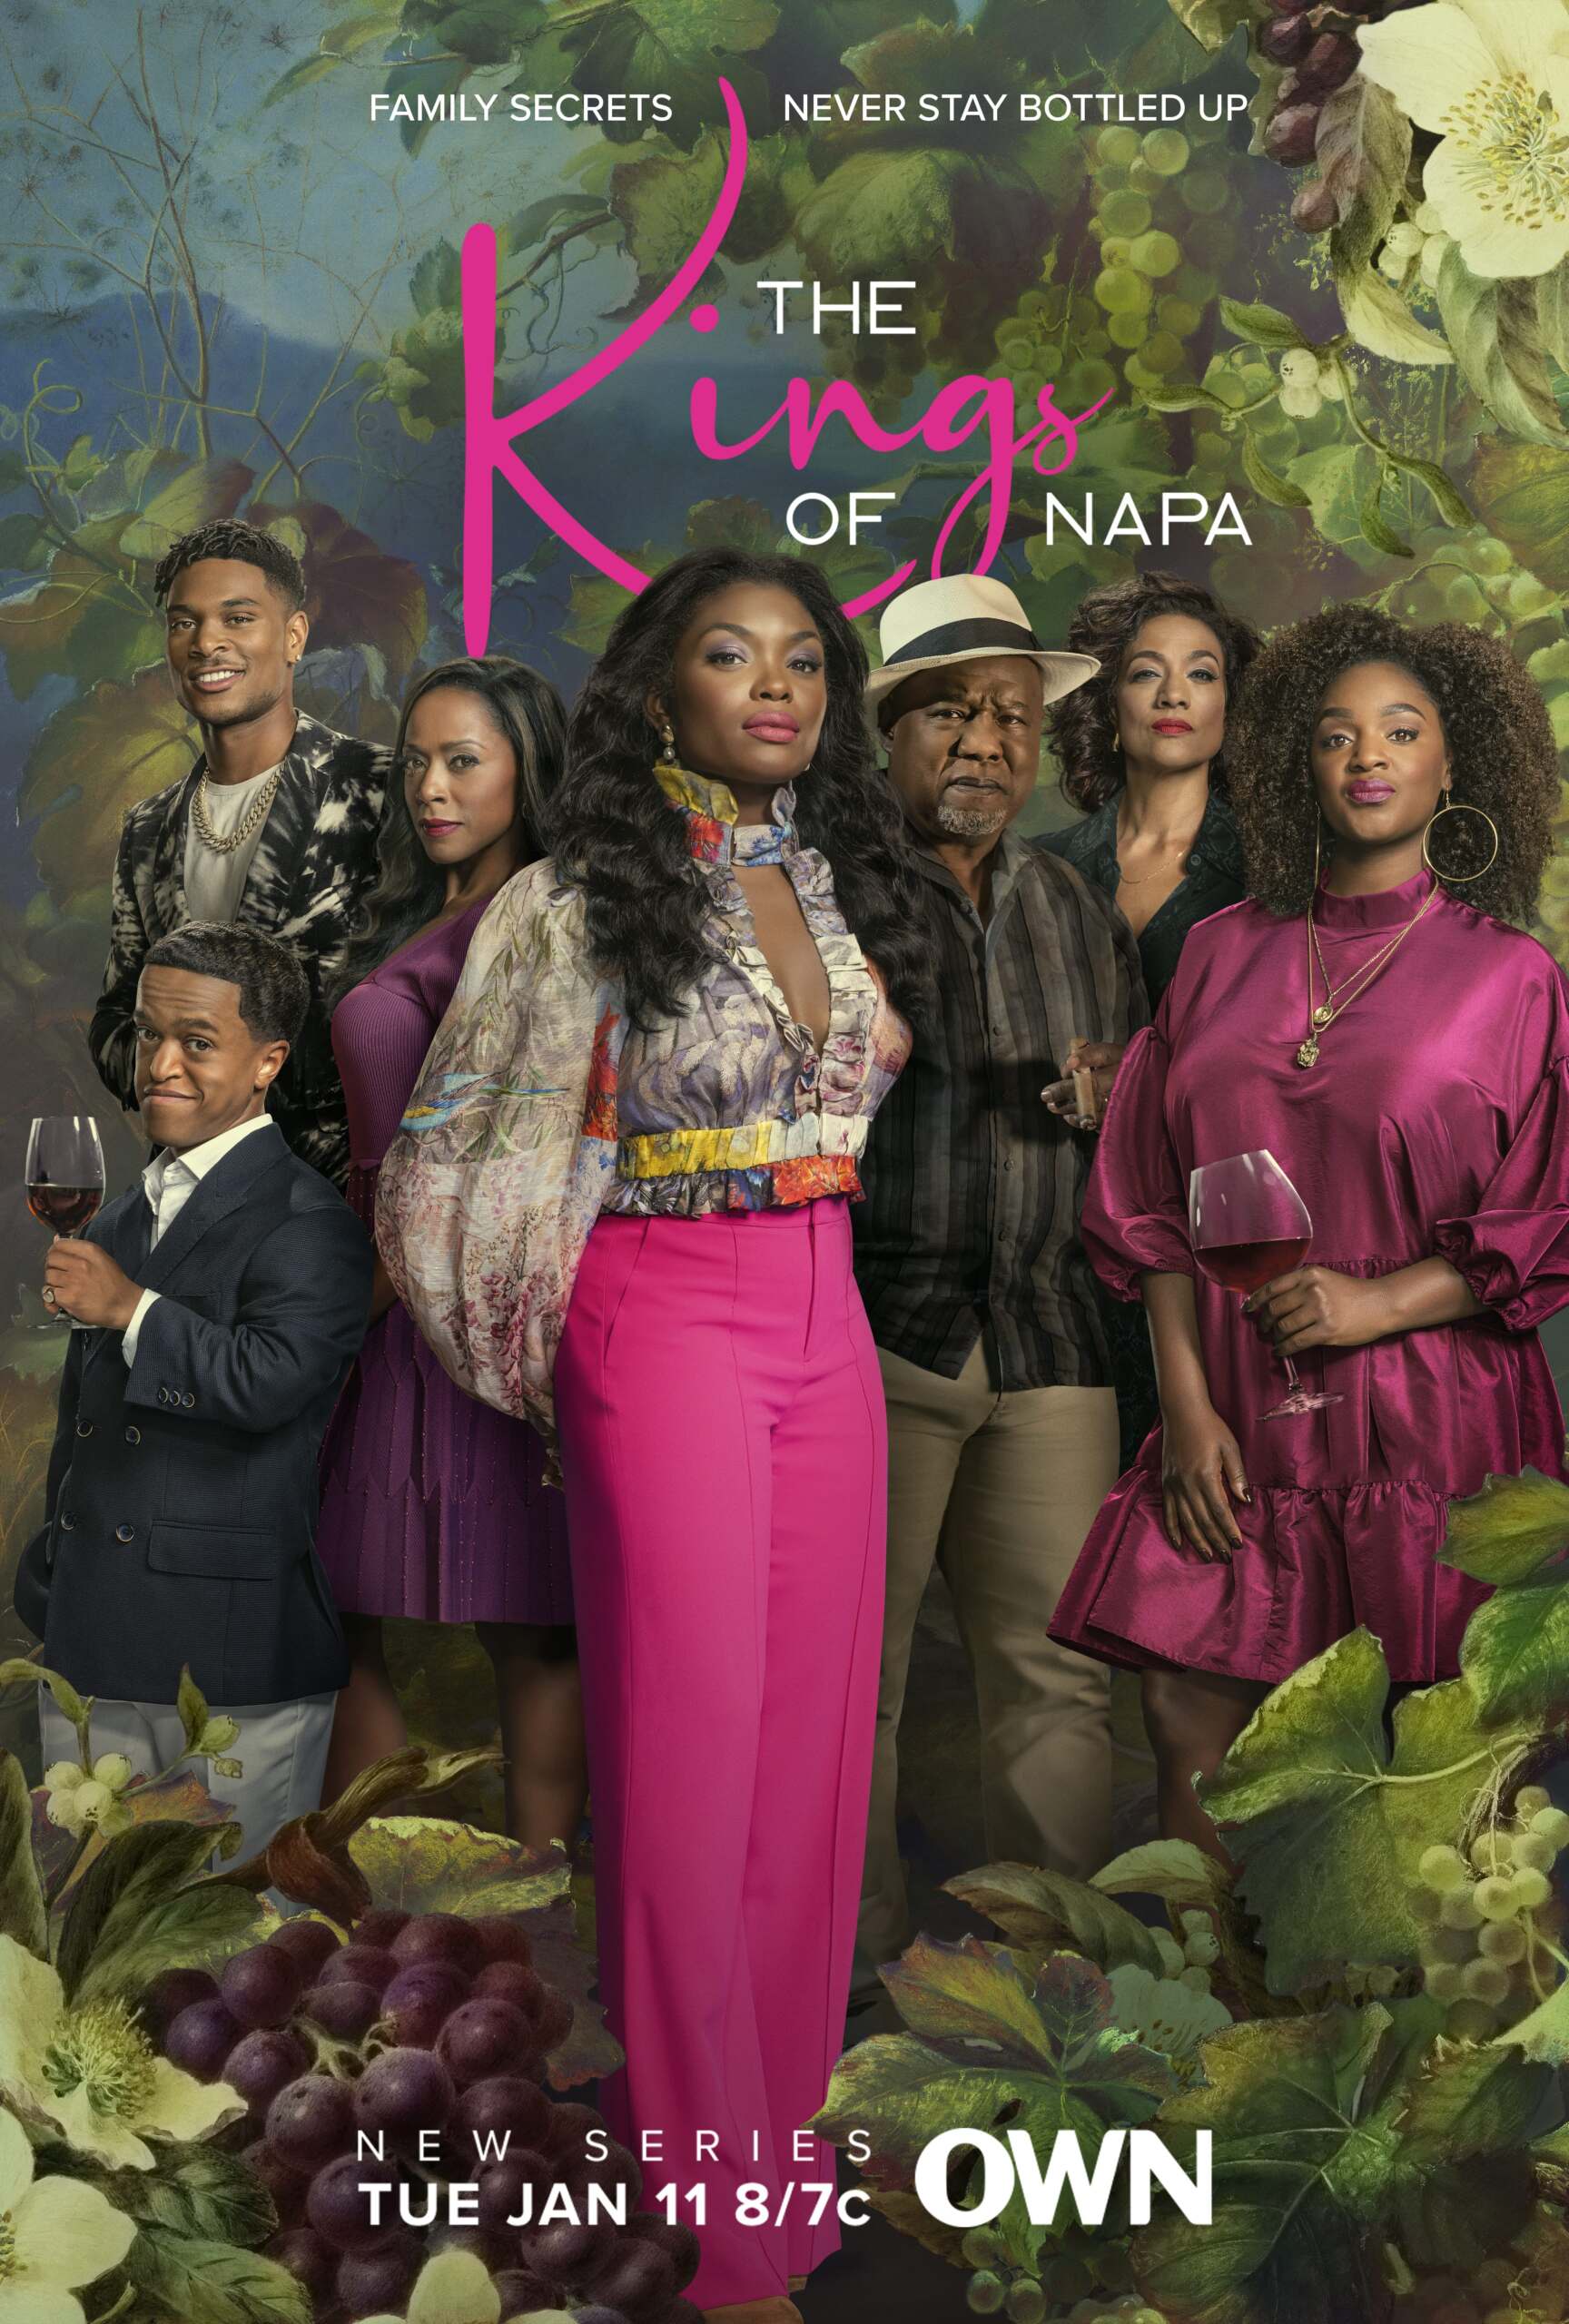 1st Trailer For OWN Original Series 'The Kings Of Napa'